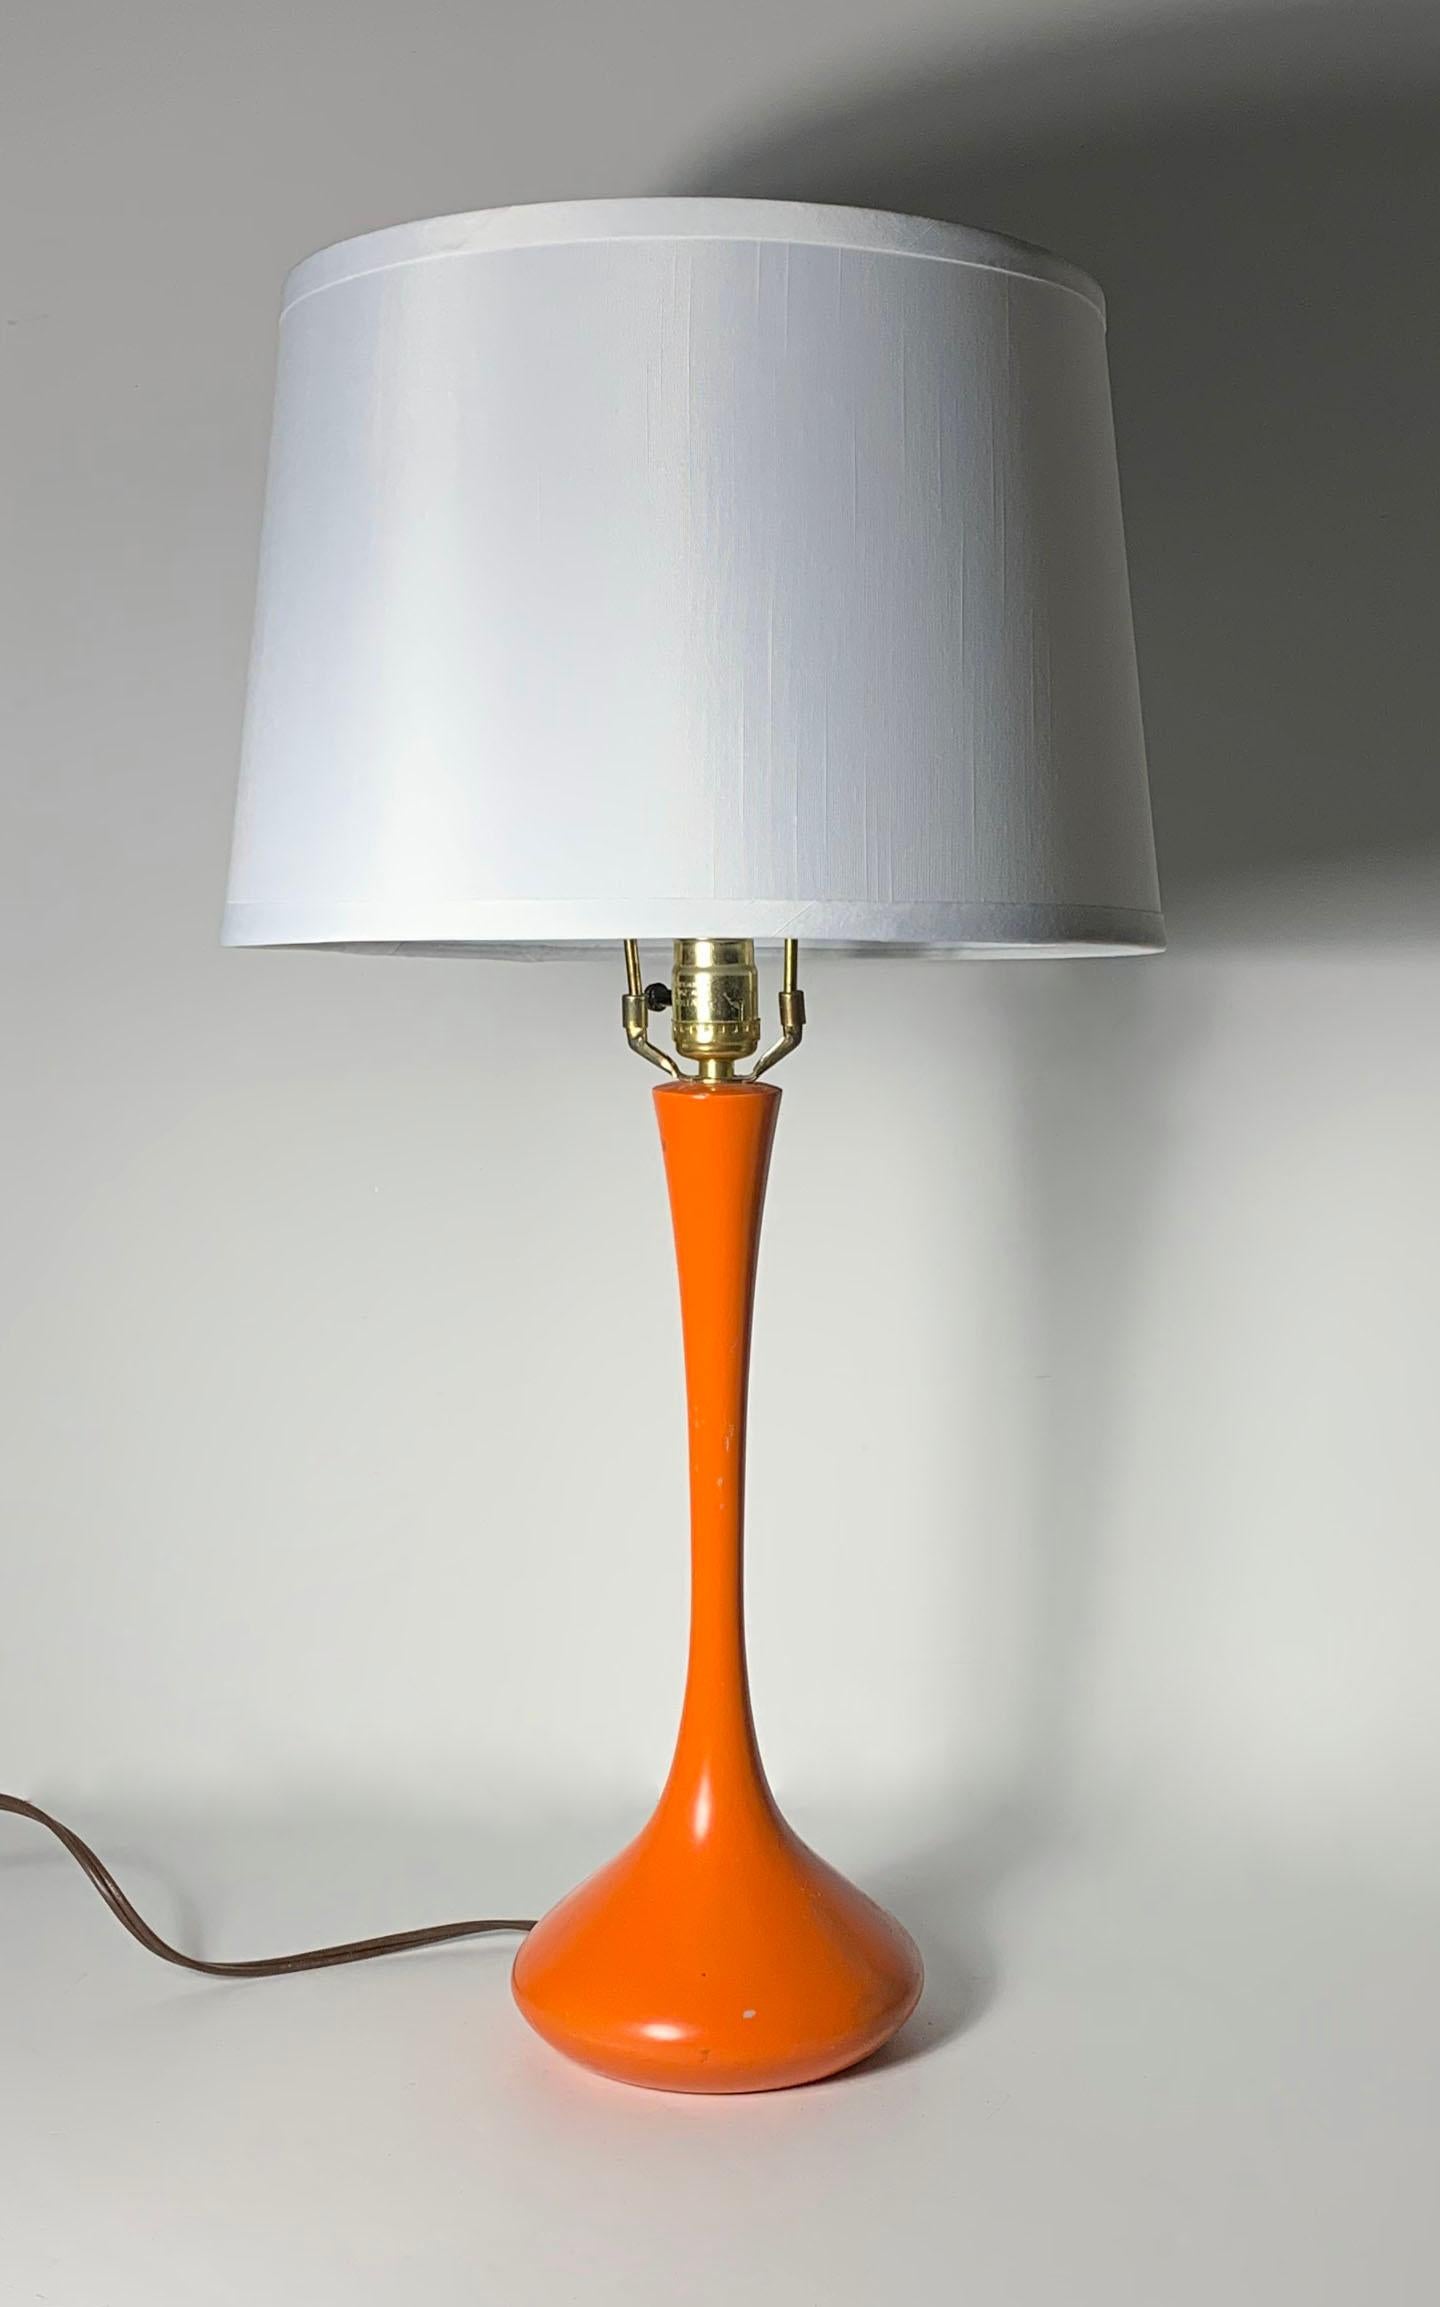 Vintage Tulip lamp by Laurel in Orange
Some minor loss and aging to original orange enamel paint (as shown).

Sold Sans Shade.